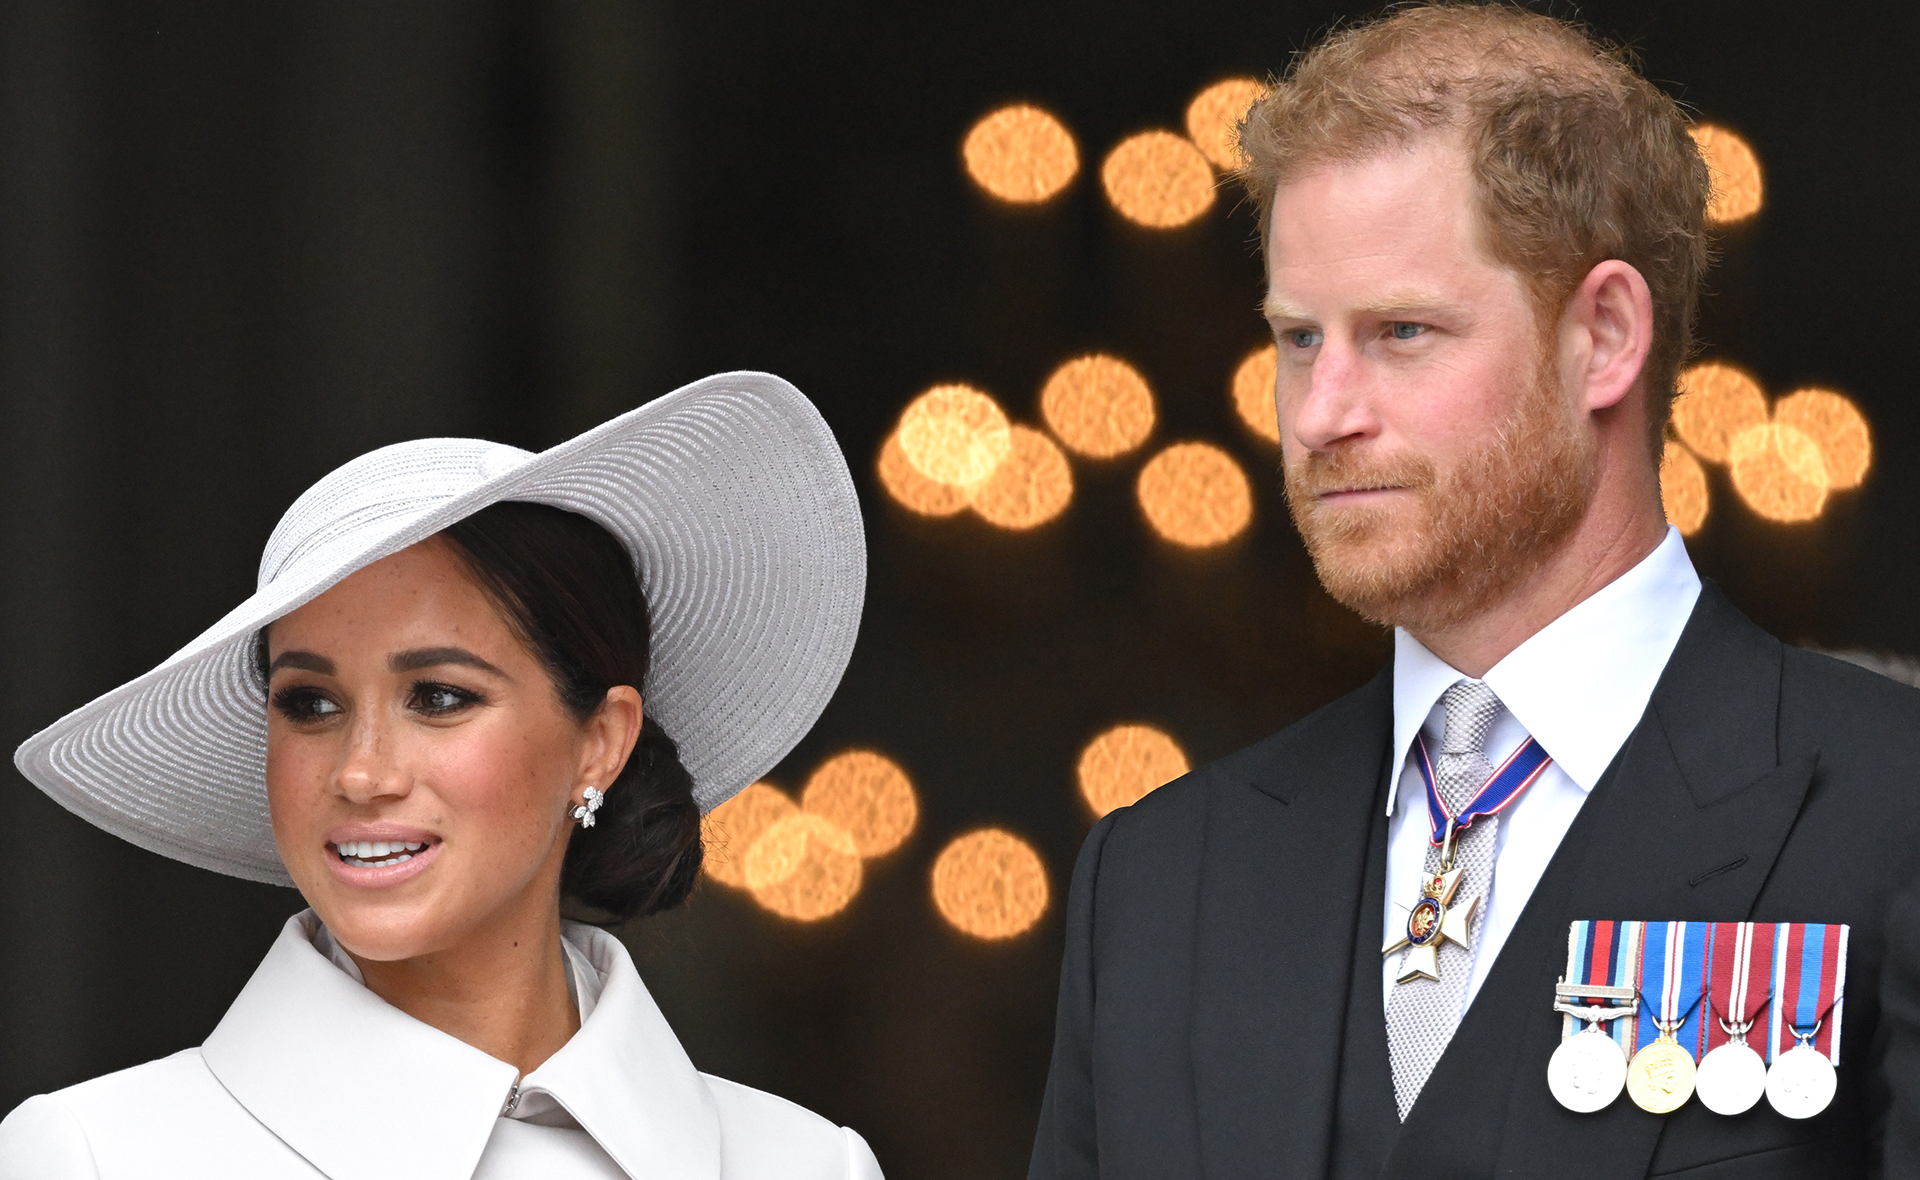 The Queen’s long-time aide reportedly warned Prince Harry and Meghan Markle’s marriage will “end in tears”